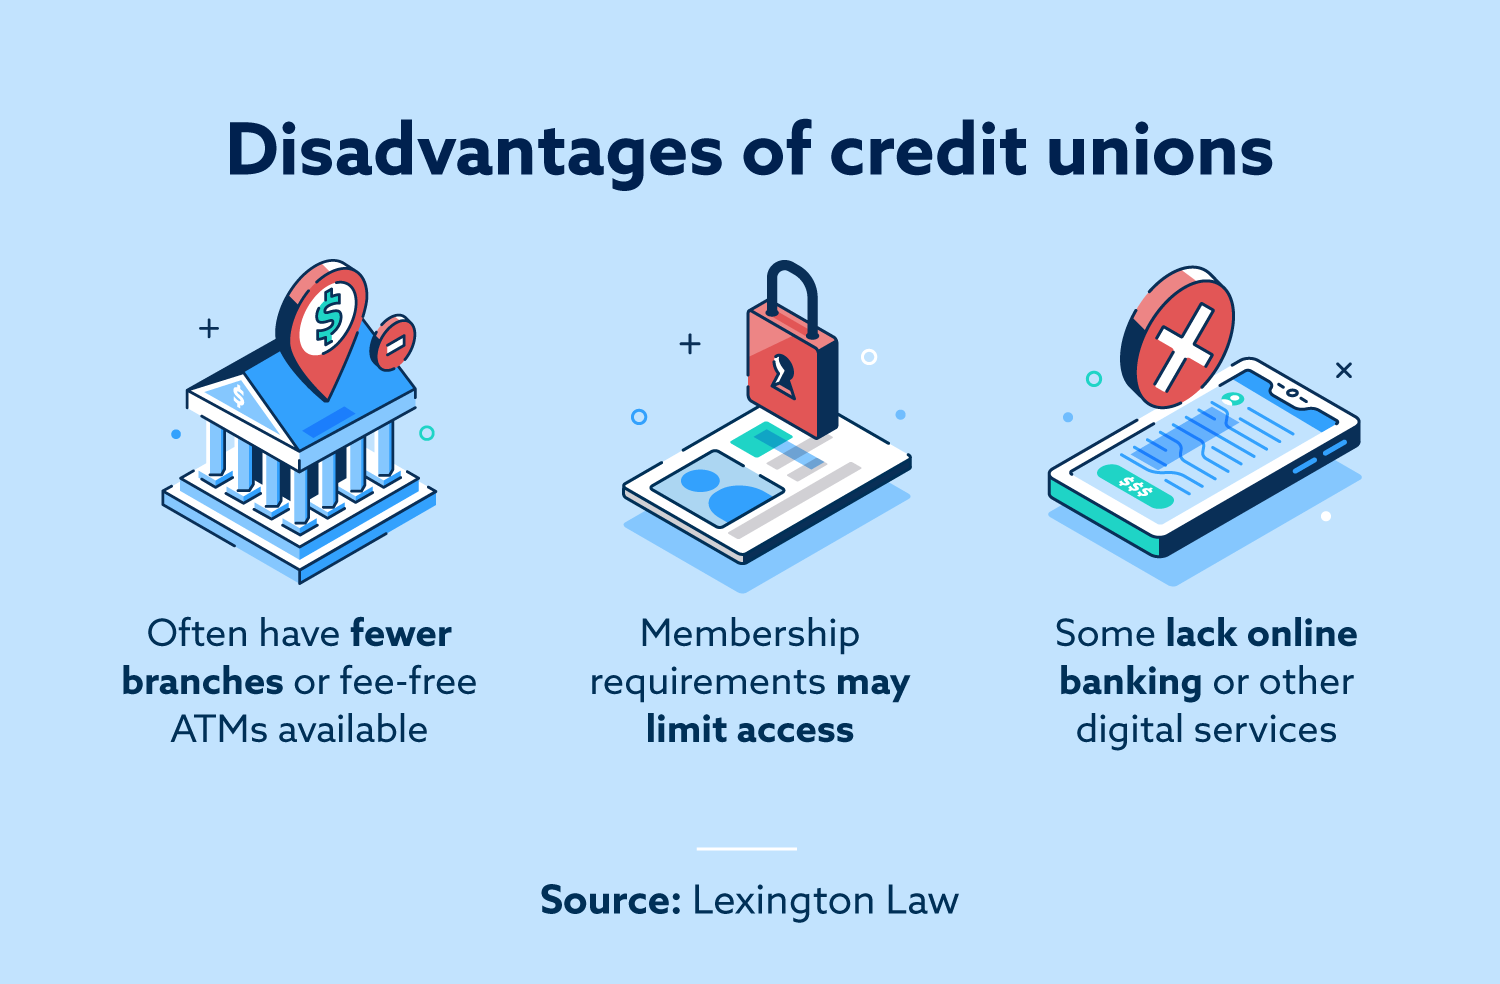 Disadvantages of credit unions